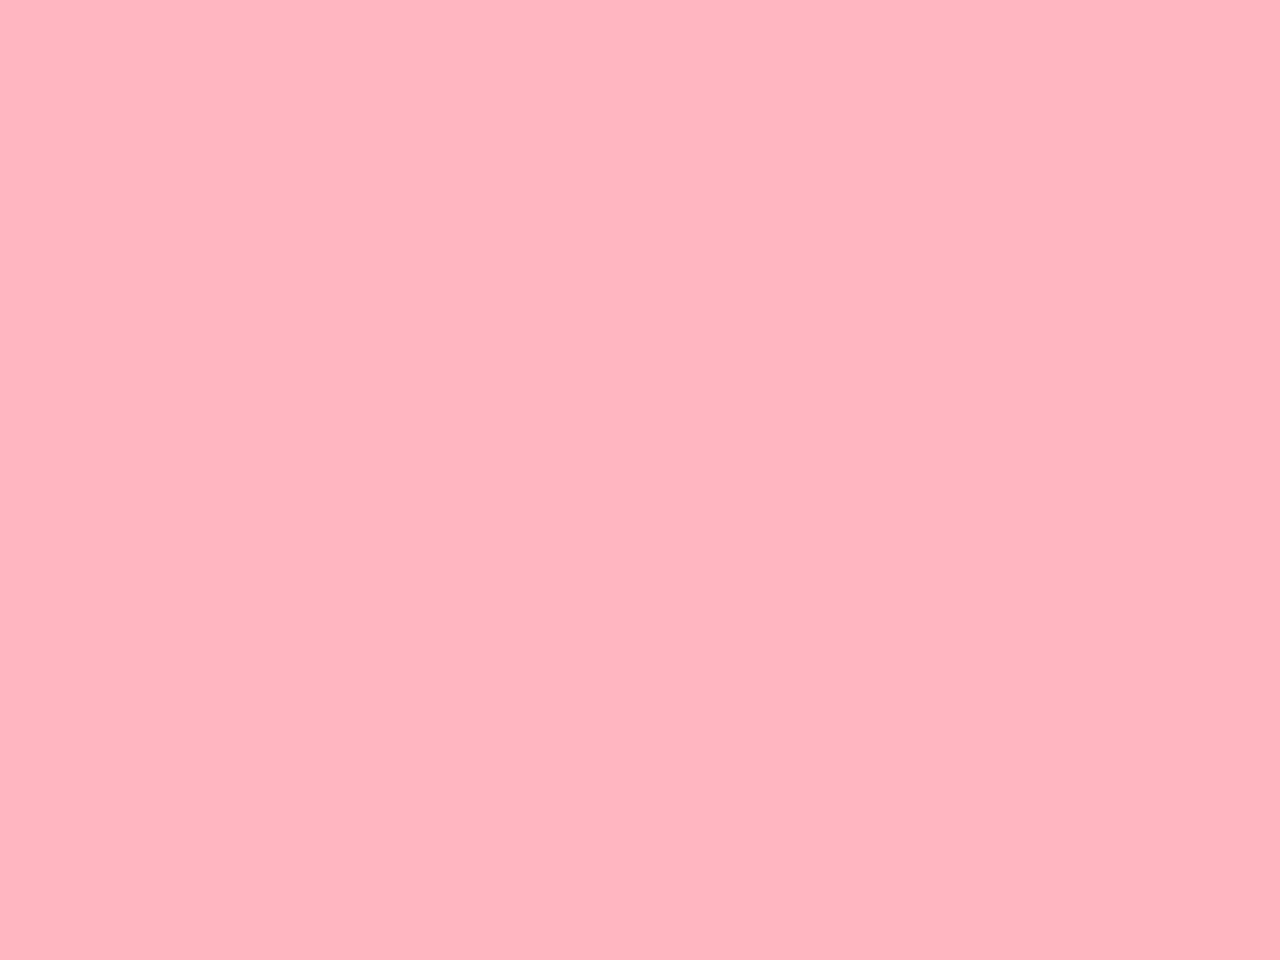  1280x960 resolution Light Pink solid color background view and 1280x960